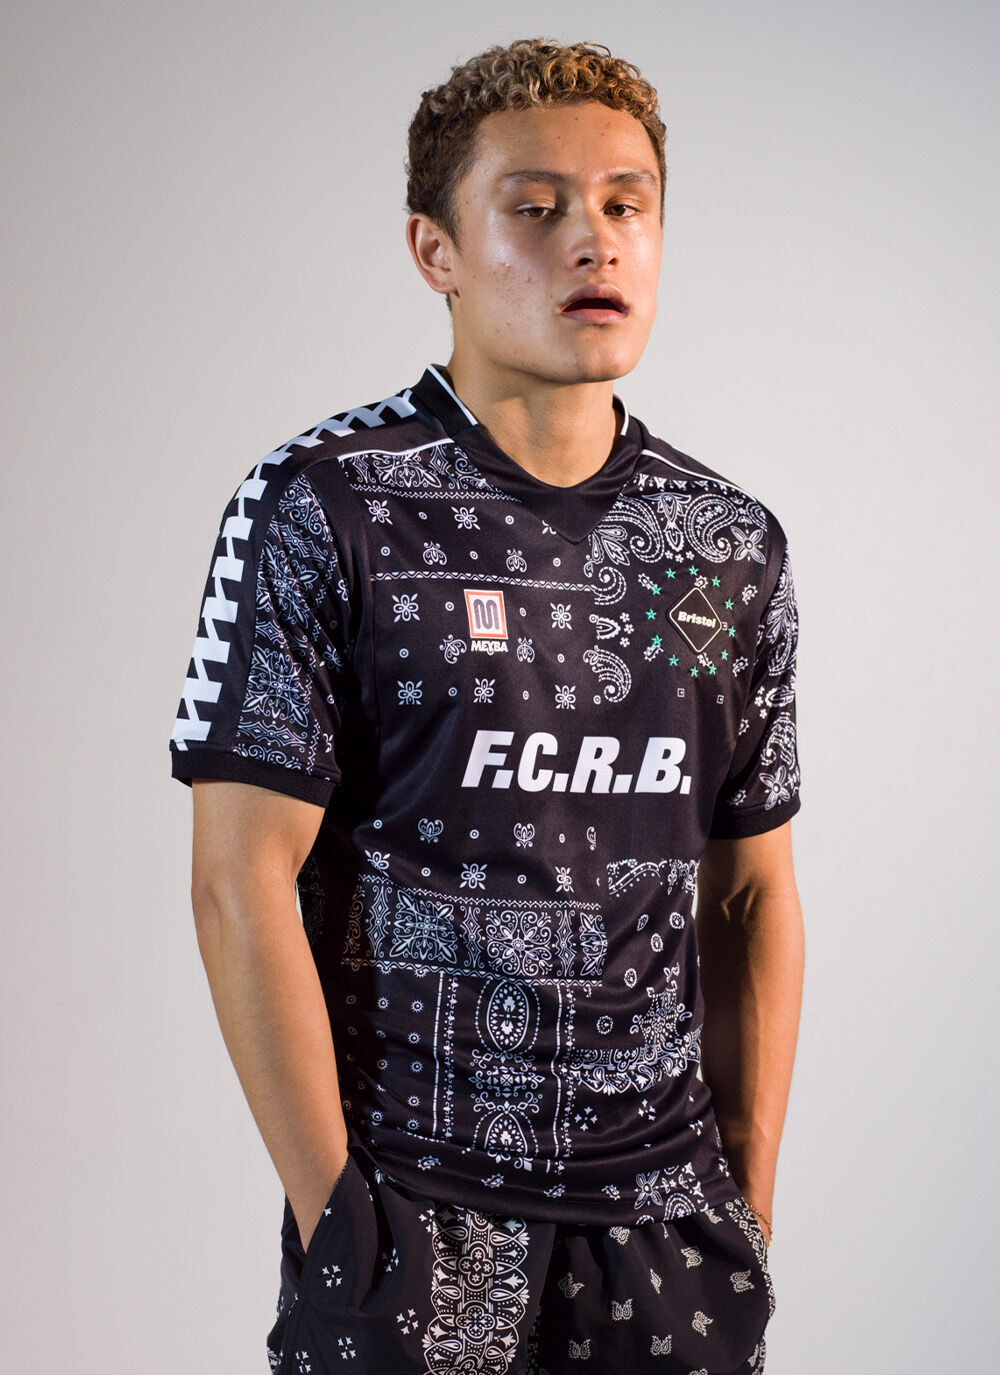 Meyba x FCRB Jersey